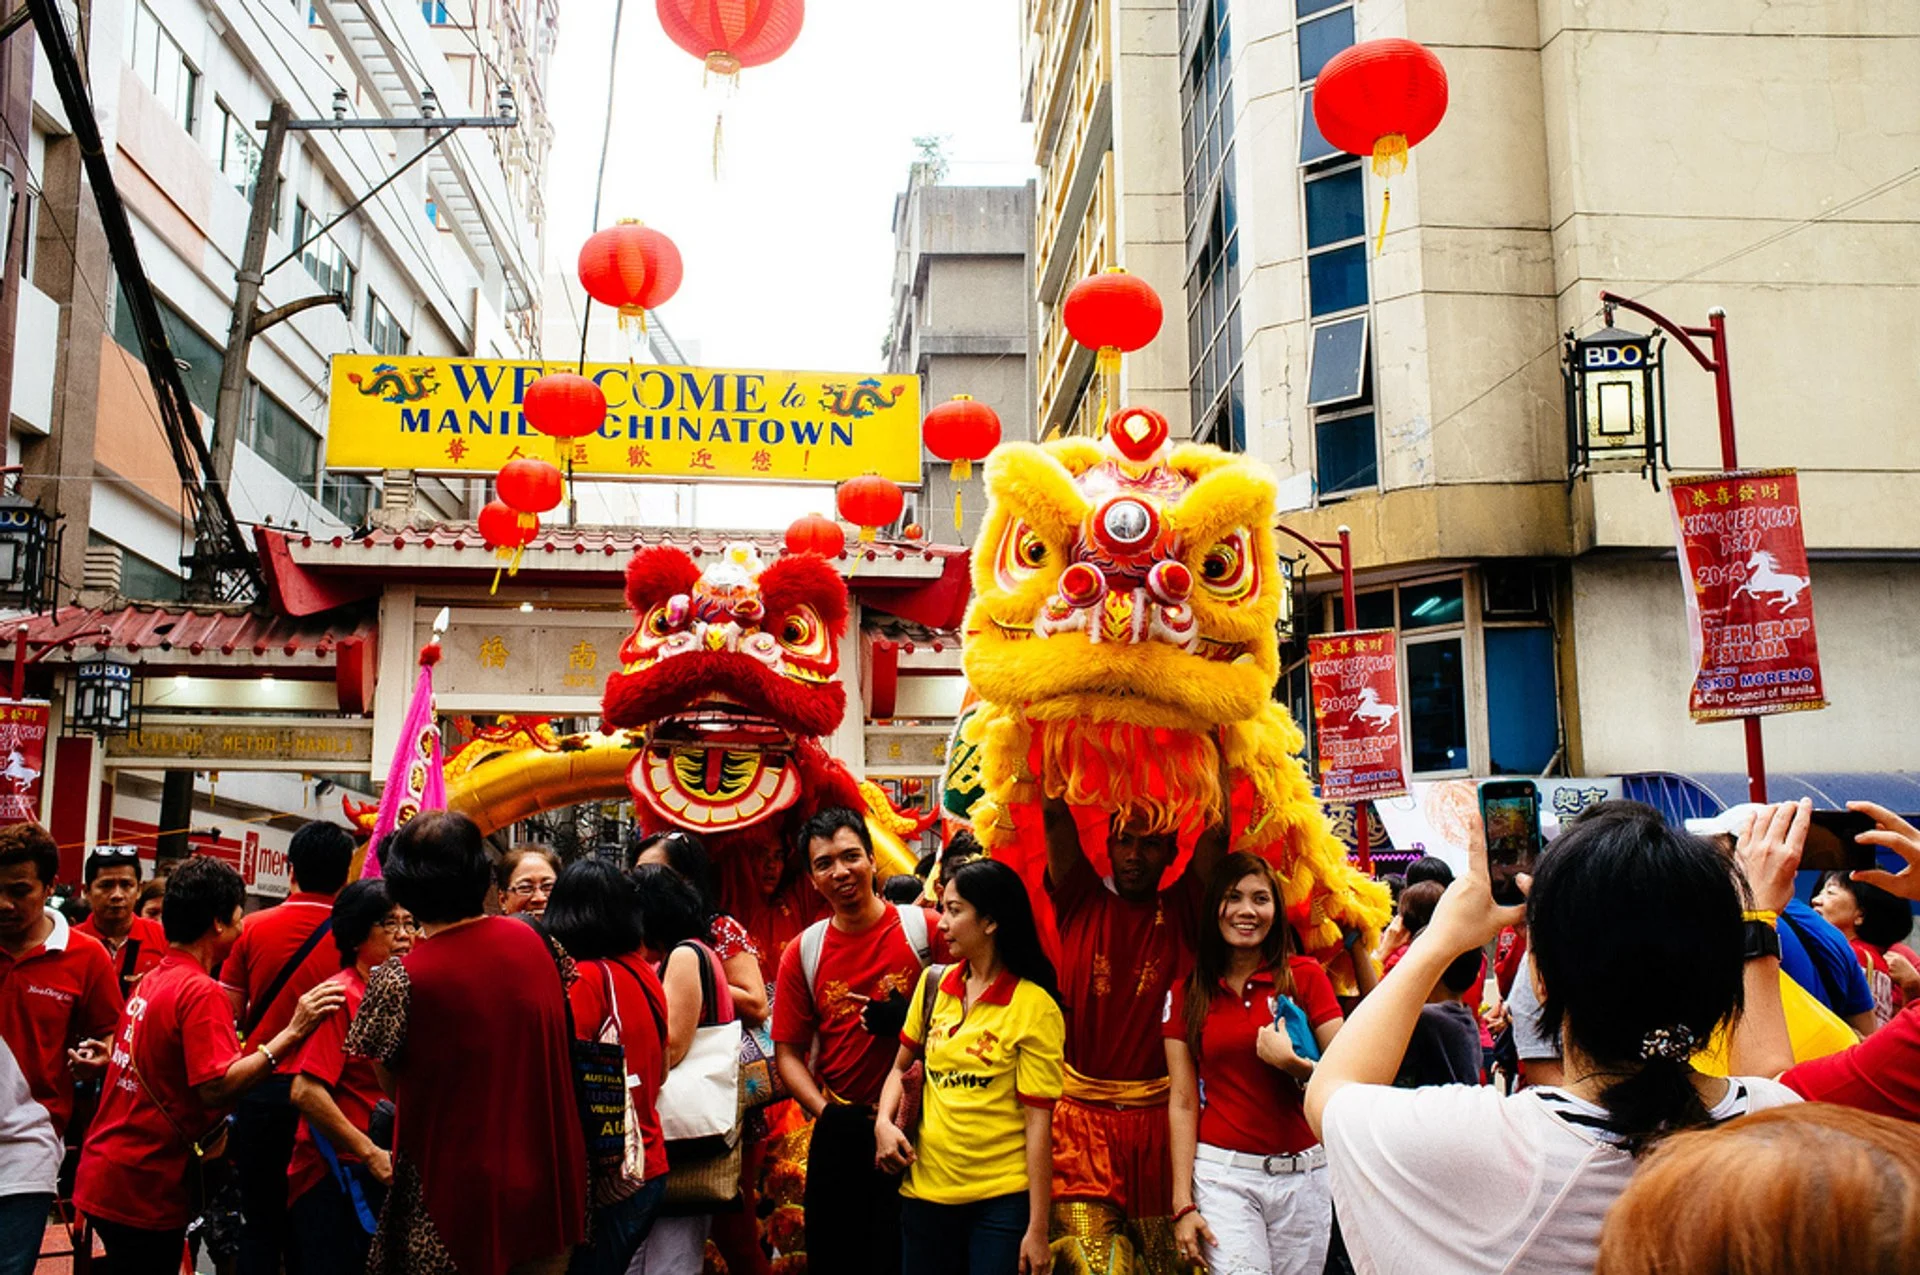 Manila, Philippines is full of Chinese New Year vibes. (Image / retrieved from Pixabay)